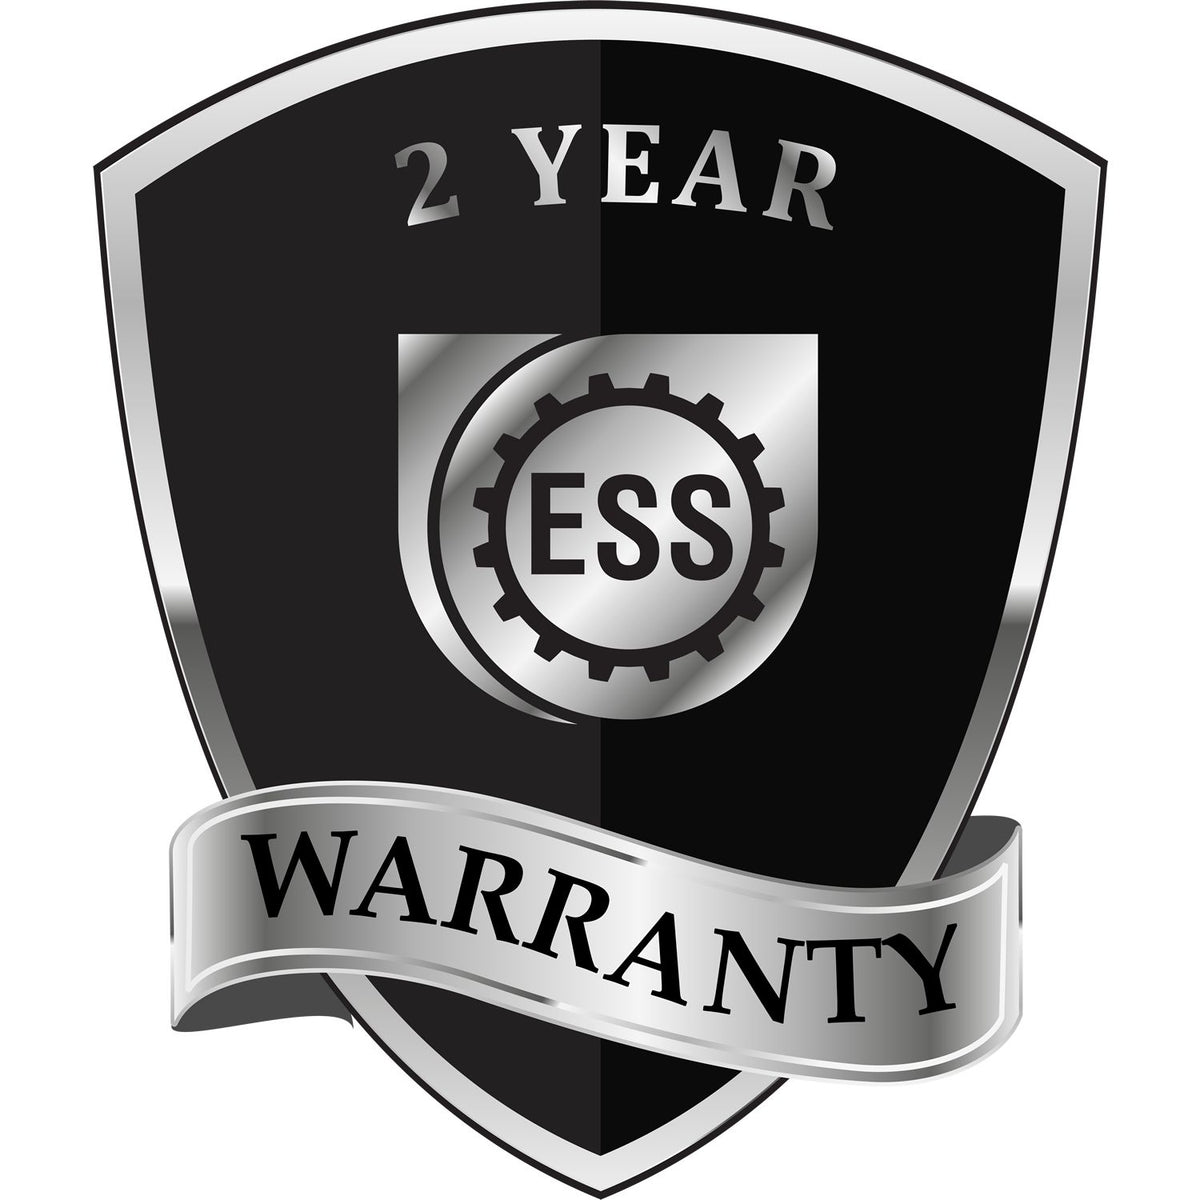 A black and silver badge or emblem showing warranty information for the Soft Georgia Professional Geologist Seal